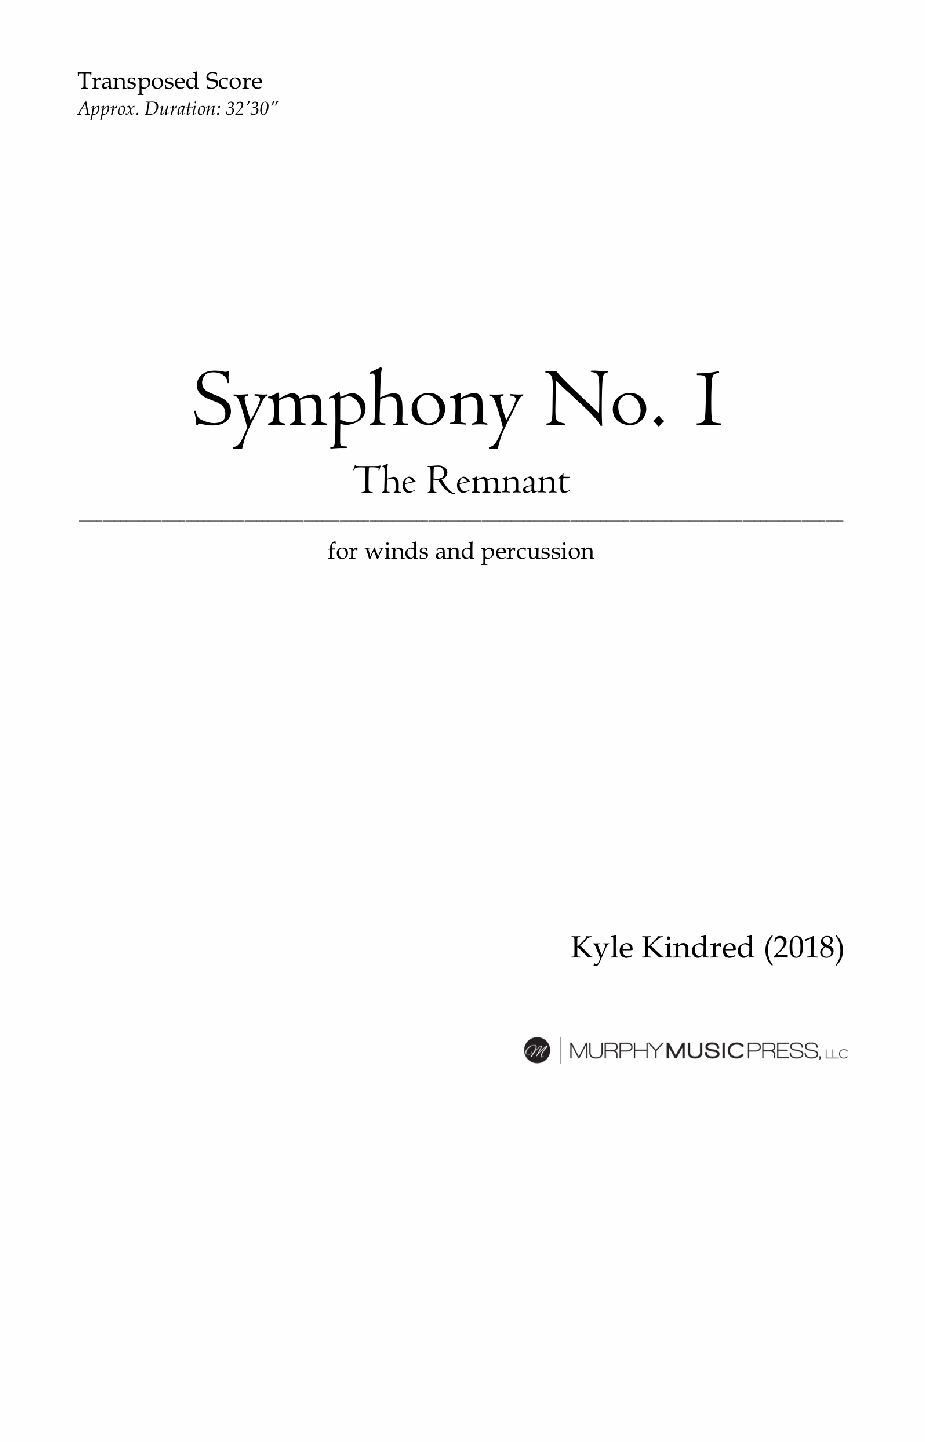 Symphony No. 1, The Remnant (parts Rental Only) by Kyle Kindred 